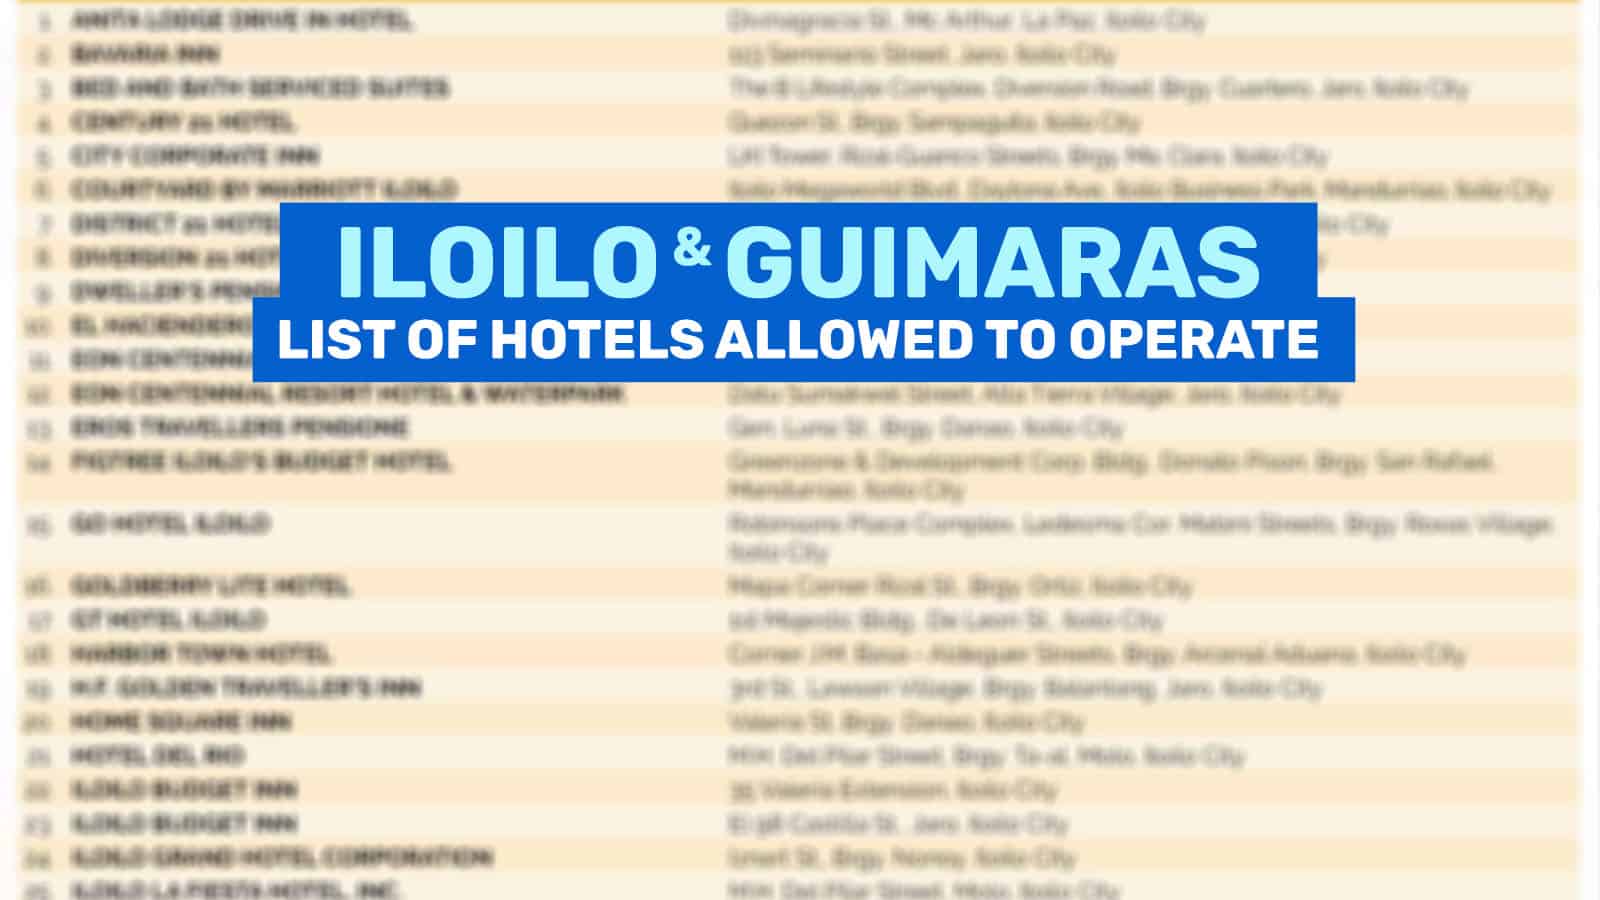 ILOILO & GUIMARAS: List of Hotels & Resorts Allowed to Operate